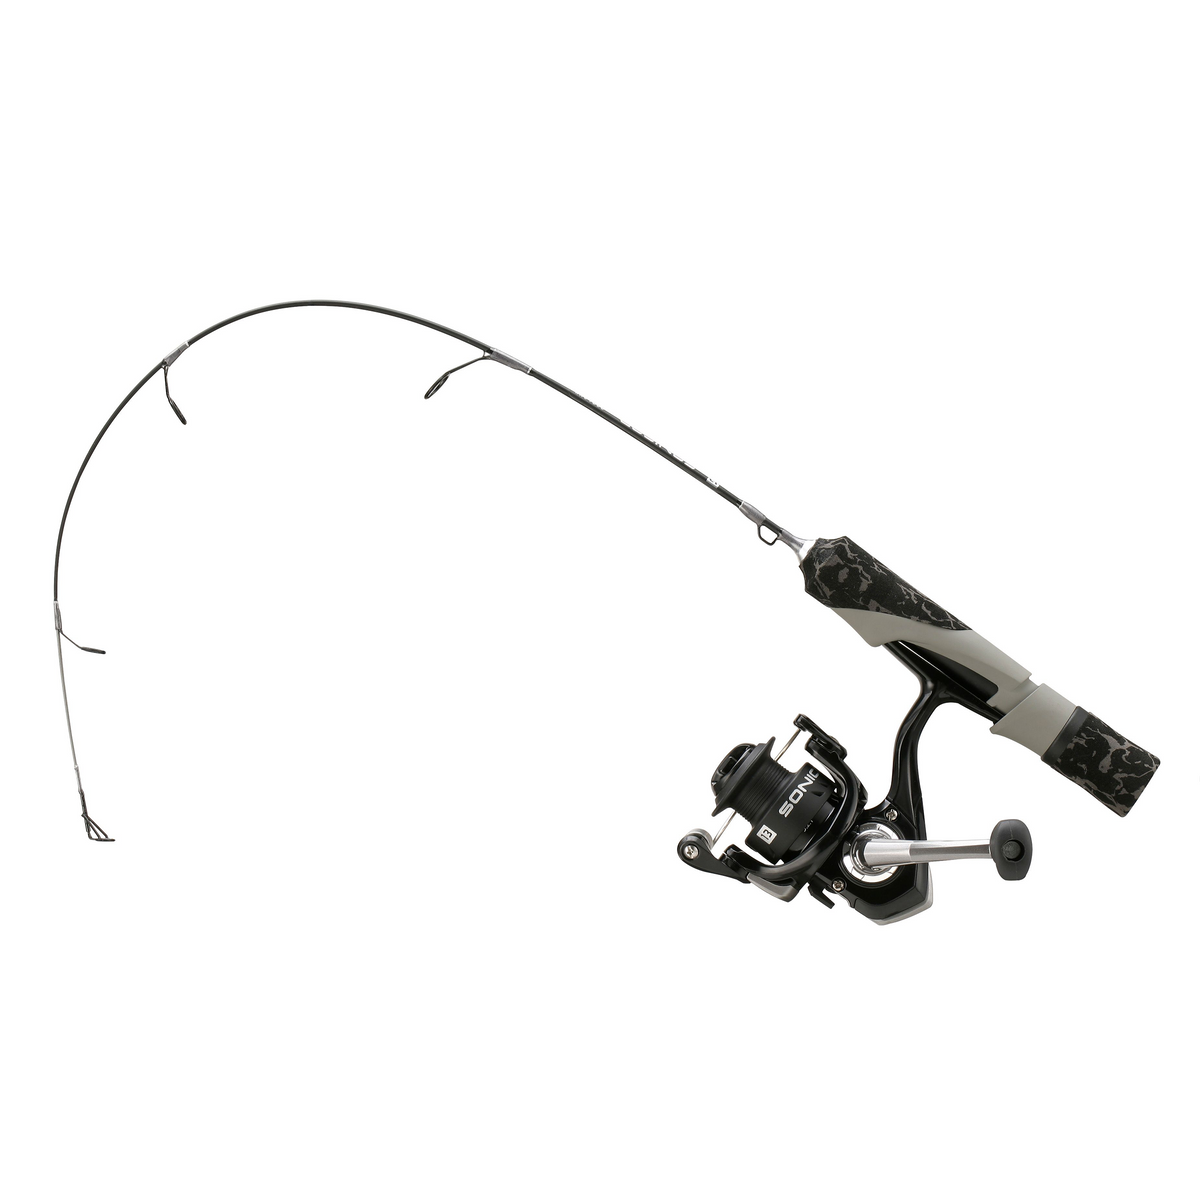 Clam Dave Genz Spring Bobber Ice Fishing Rod and Reel Combo, 27 Length,  Medium Light Power - 724056, Ice Fishing Combos at Sportsman's Guide